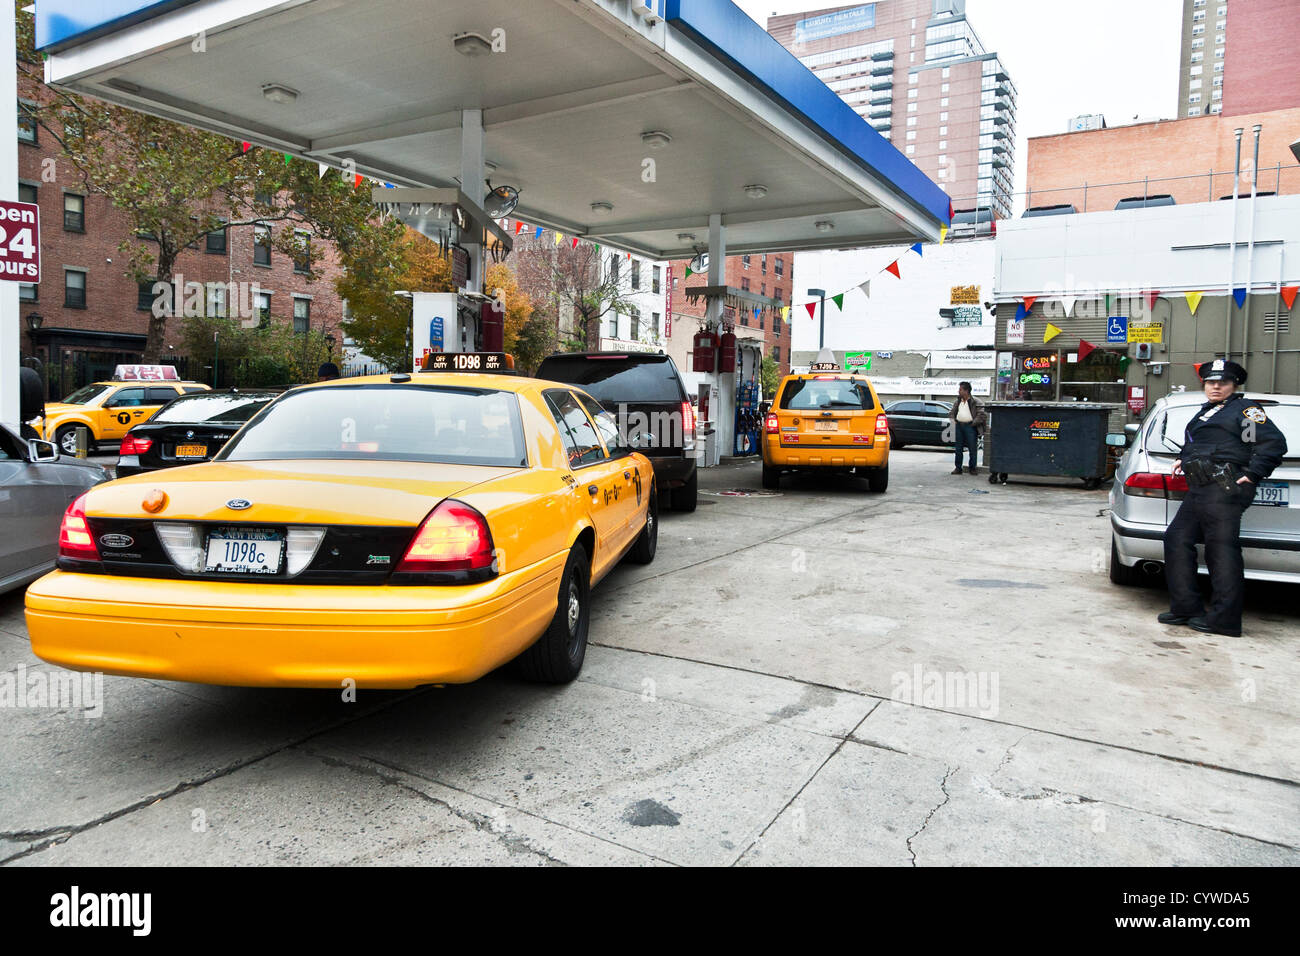 Woman police officer monitoring vehicle access to pumps at west side Manhattan service station on November 10th 2012, the 2nd day of gas rationing in New York City USA. Orders from Mayor Michael Bloomberg and Governor Andrew Cuomo restrict private owners to buying fuel for their vehicles on either odd- or even-numbered days, depending on the last digit of their license numbers. Commercial vehicles are exempt. Stock Photo